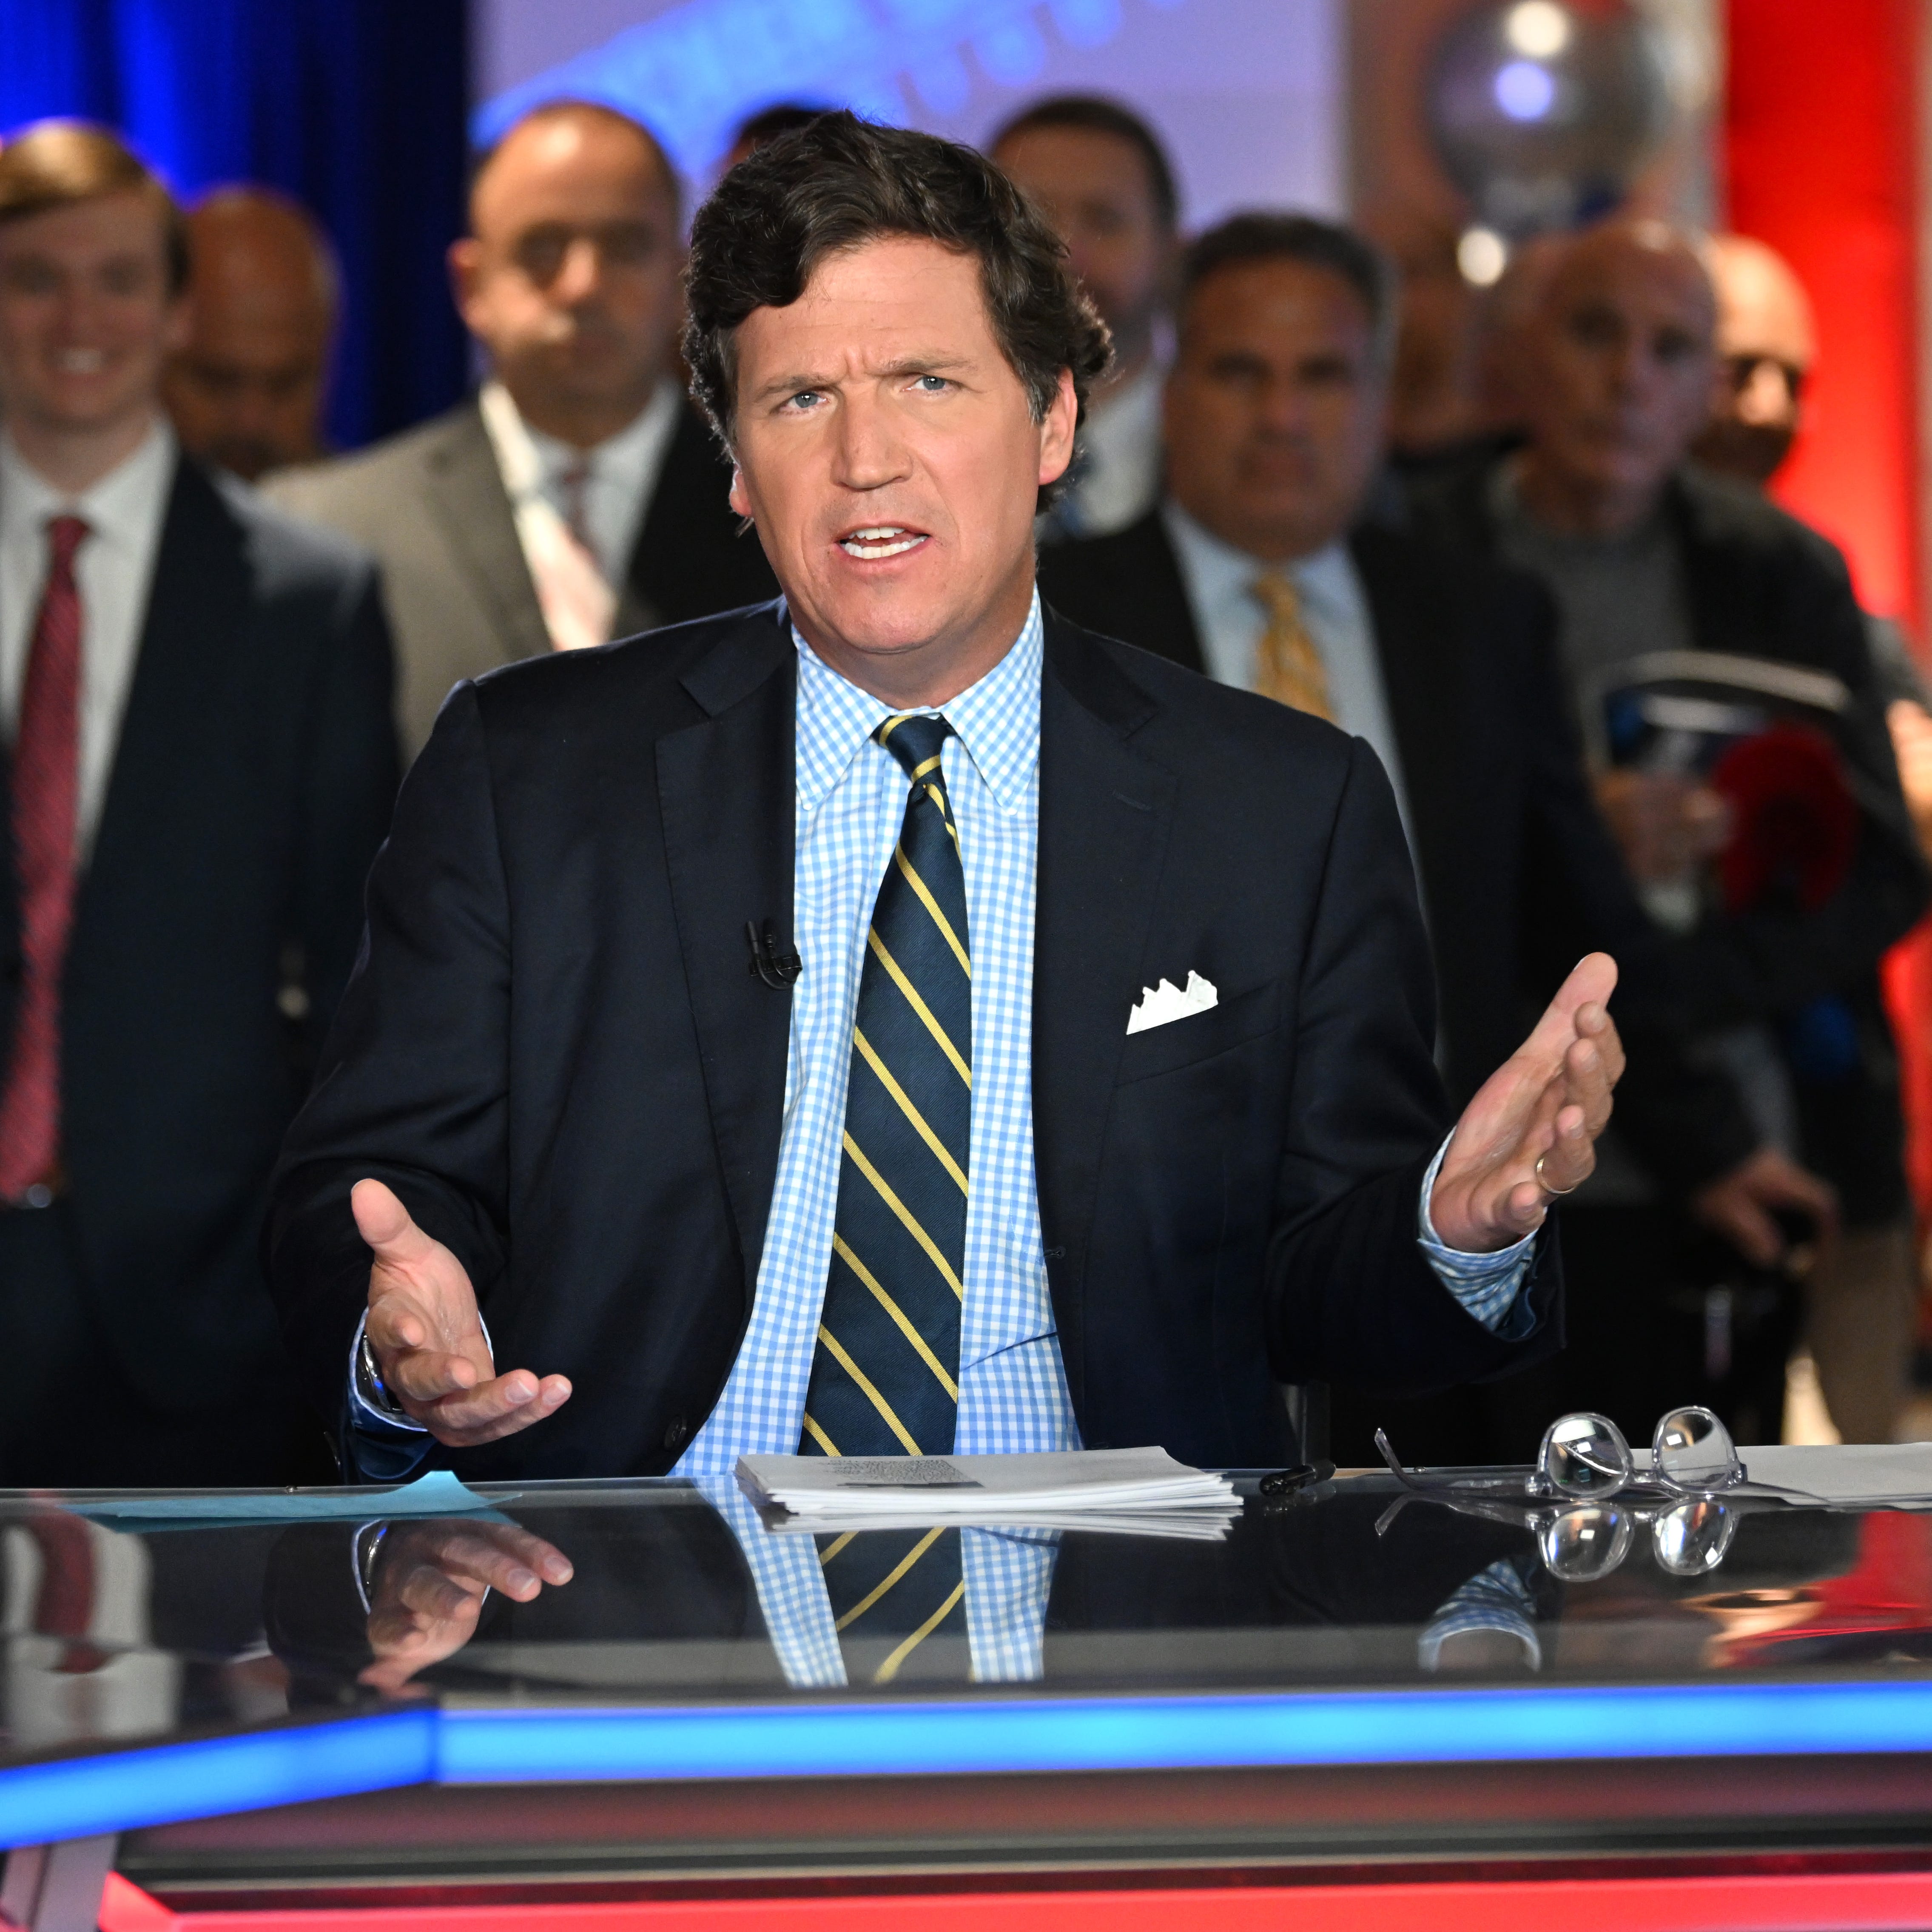 It was reported that Fox News has announced that it has parted ways with Tucker Carlson, the network's highest-rated prime-time host April 24, 2023.  Tucker Carlson speaks during 2022 FOX Nation Patriot Awards at Hard Rock Live at Seminole Hard Rock Hotel & Casino Hollywood on Nov. 17, 2022 in Hollywood, Fla.